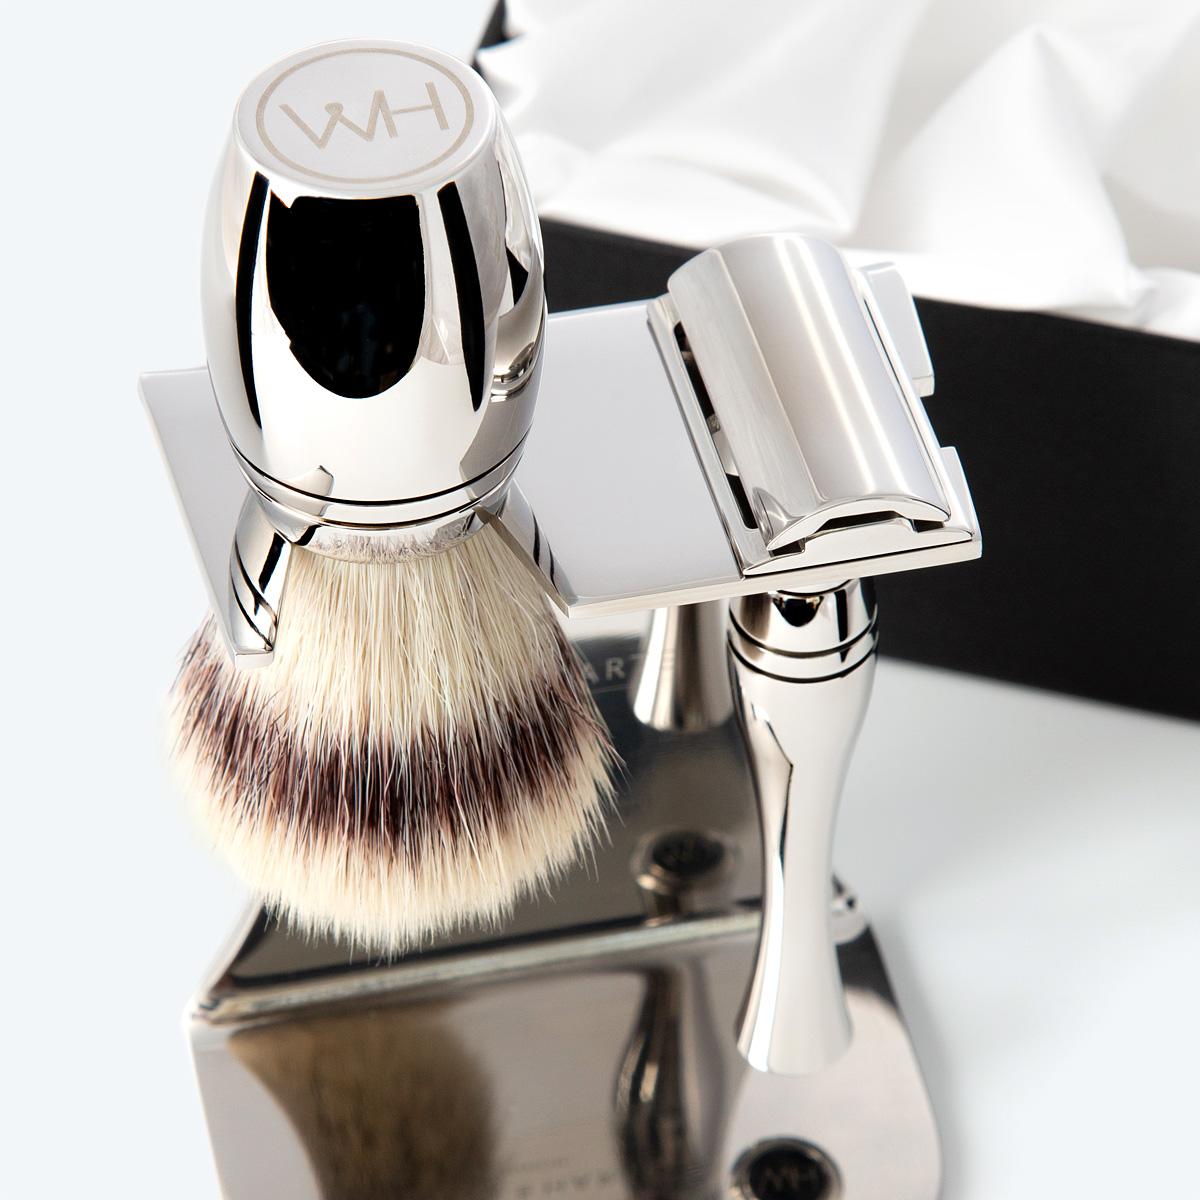 stainless steel contemporary design razor and synthetic fibre shaving gift set